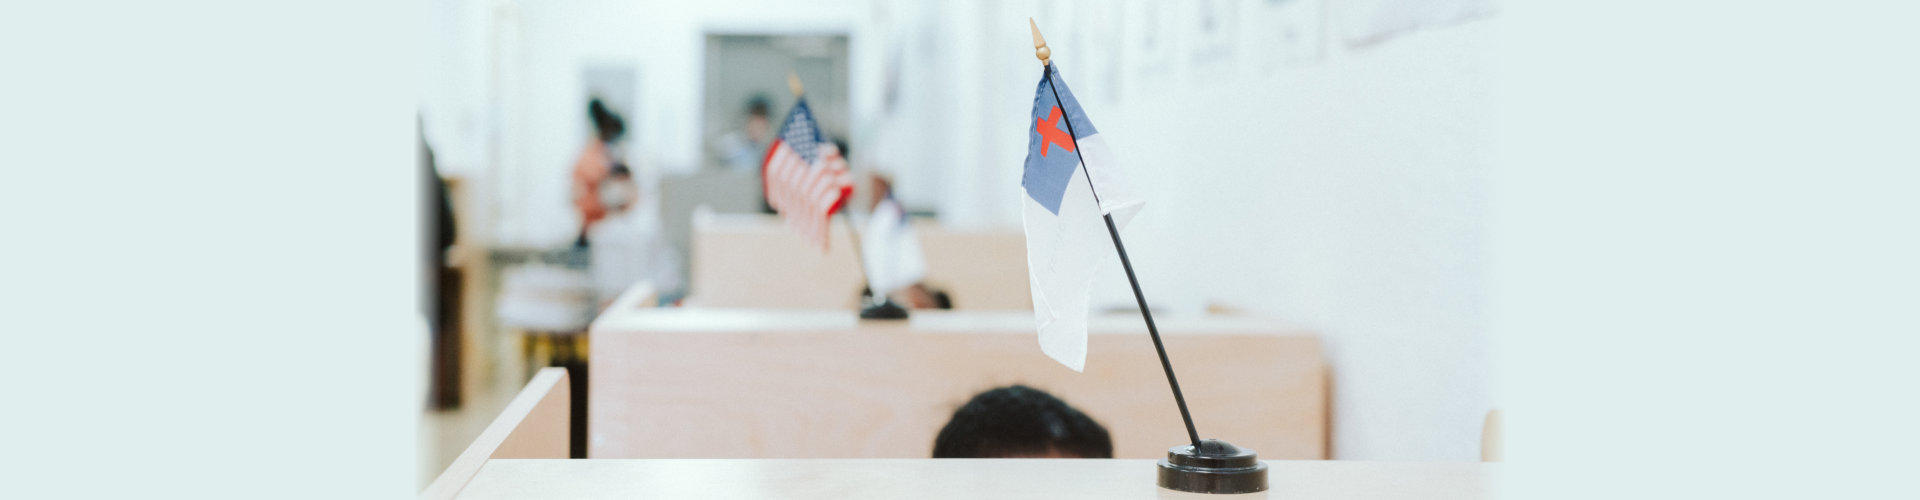 mini flags on the table